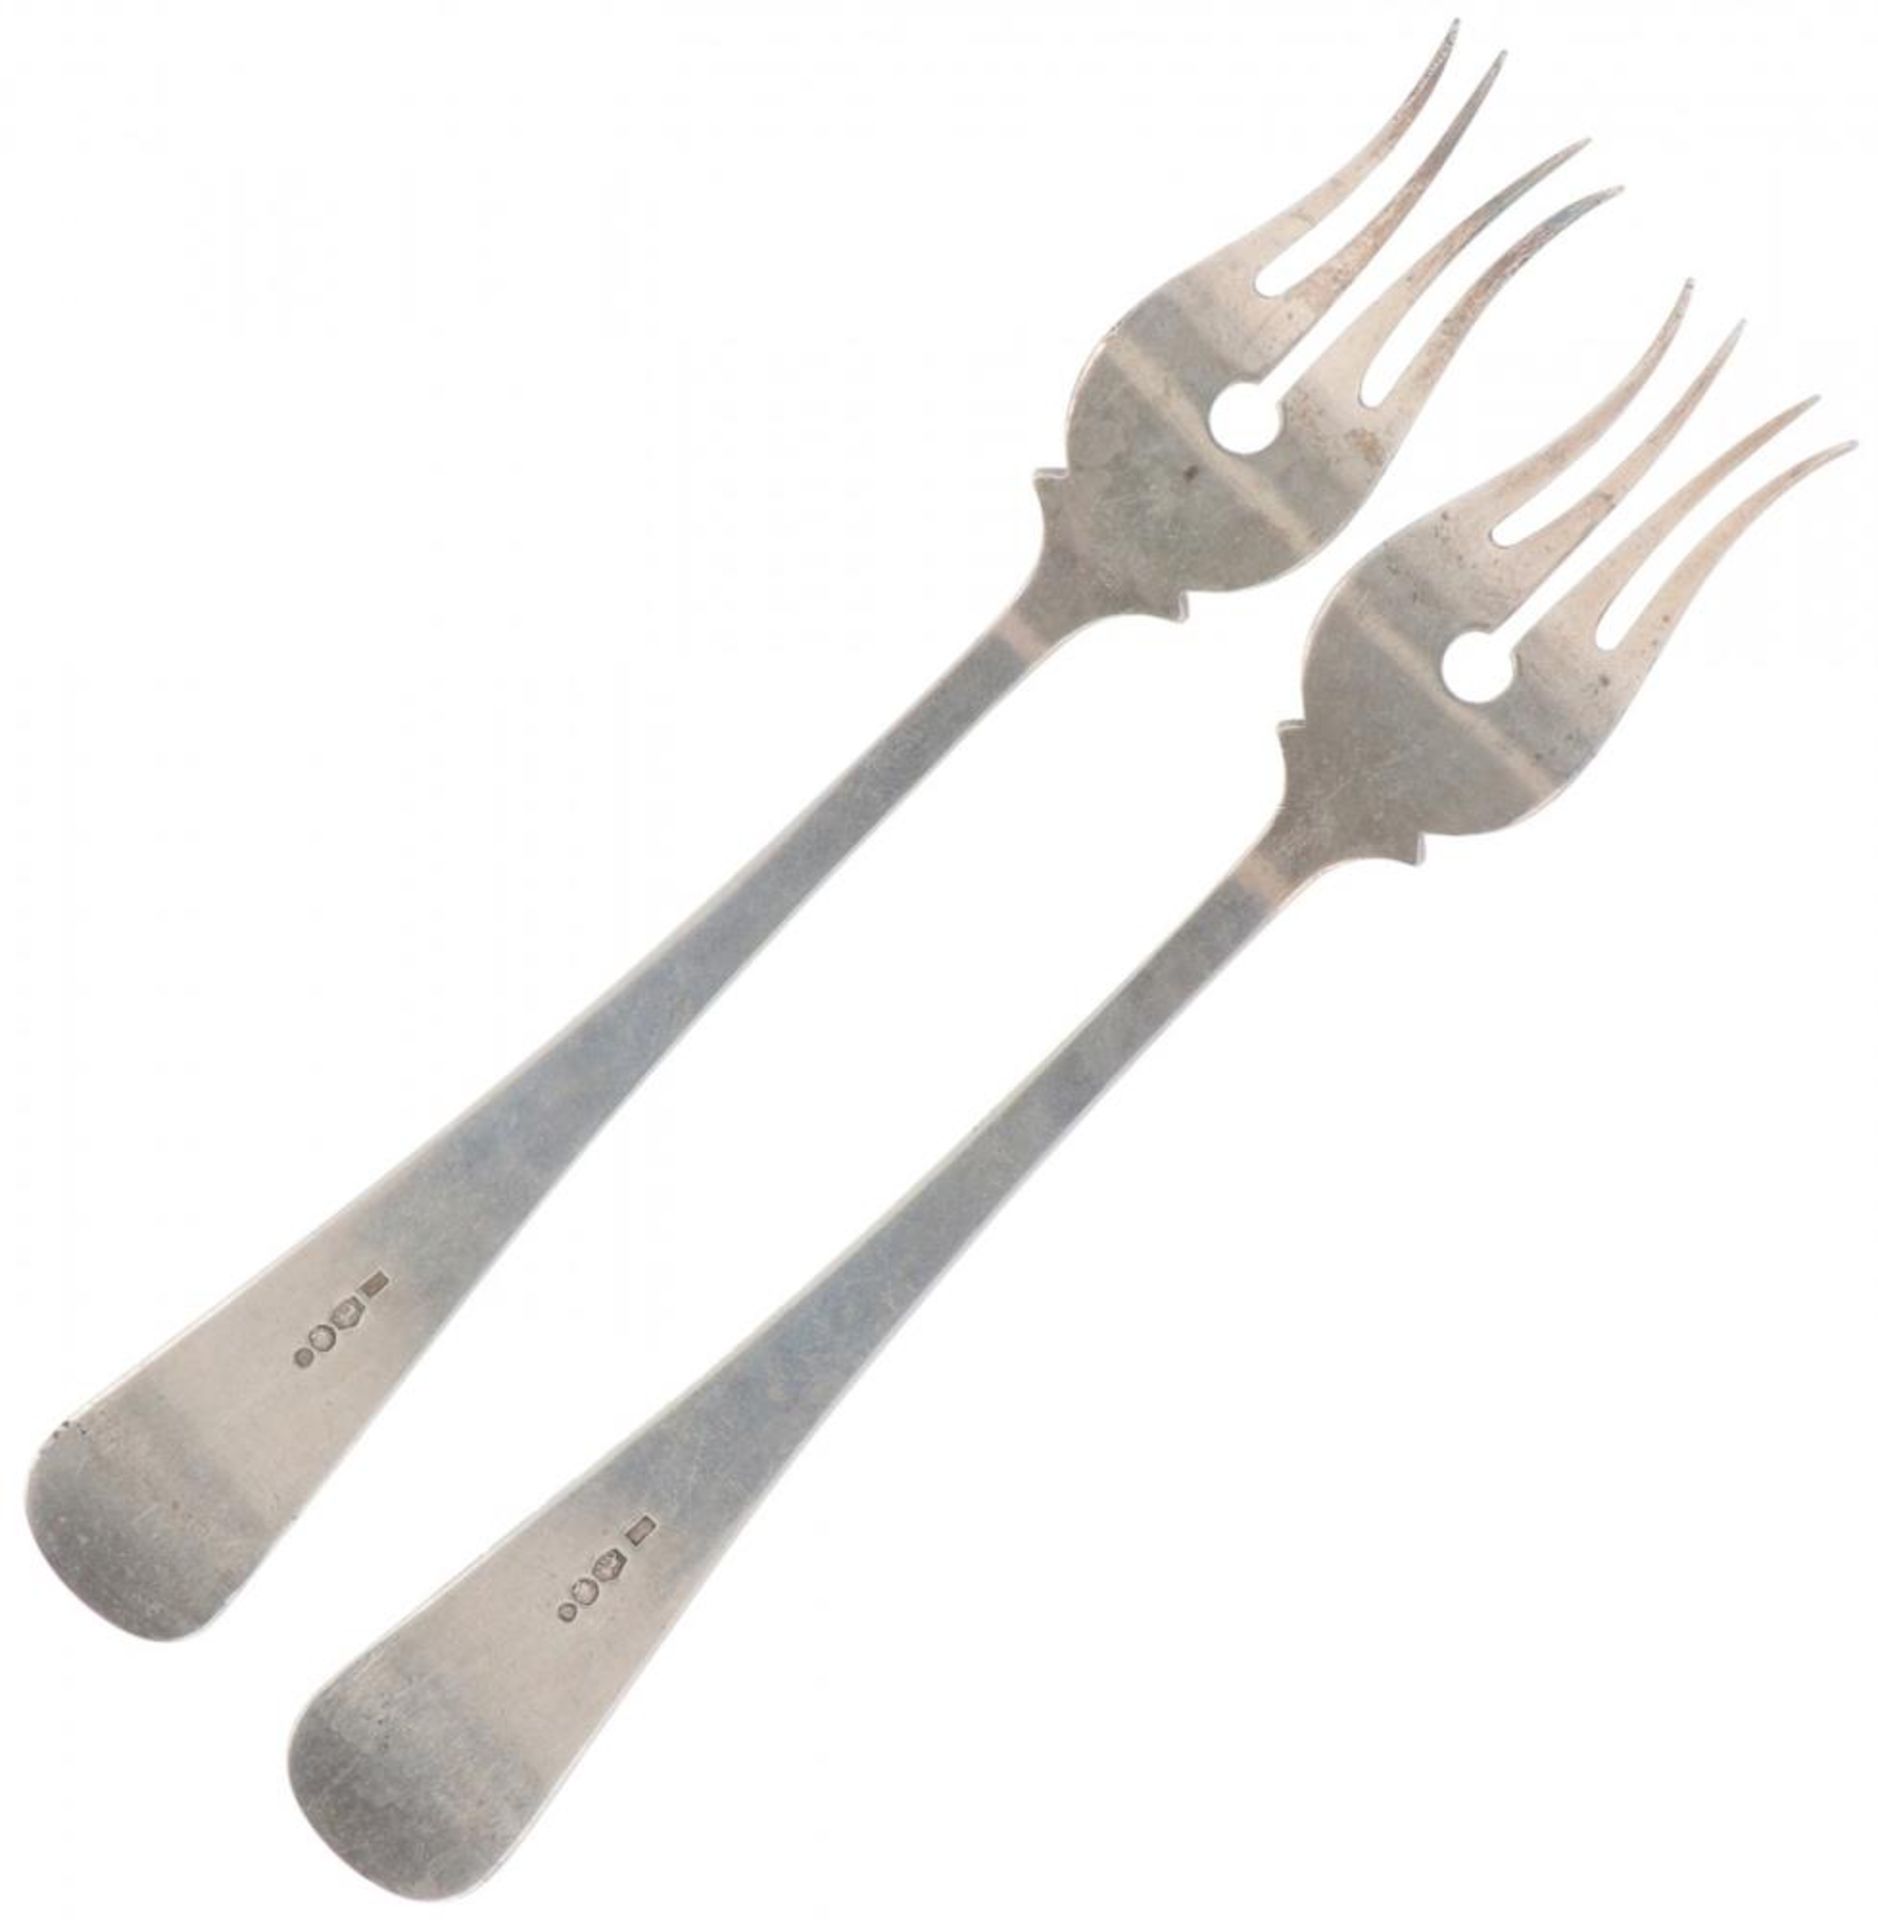 (2) piece set of cold meat forks "Haags Lofje" silver. - Image 2 of 3